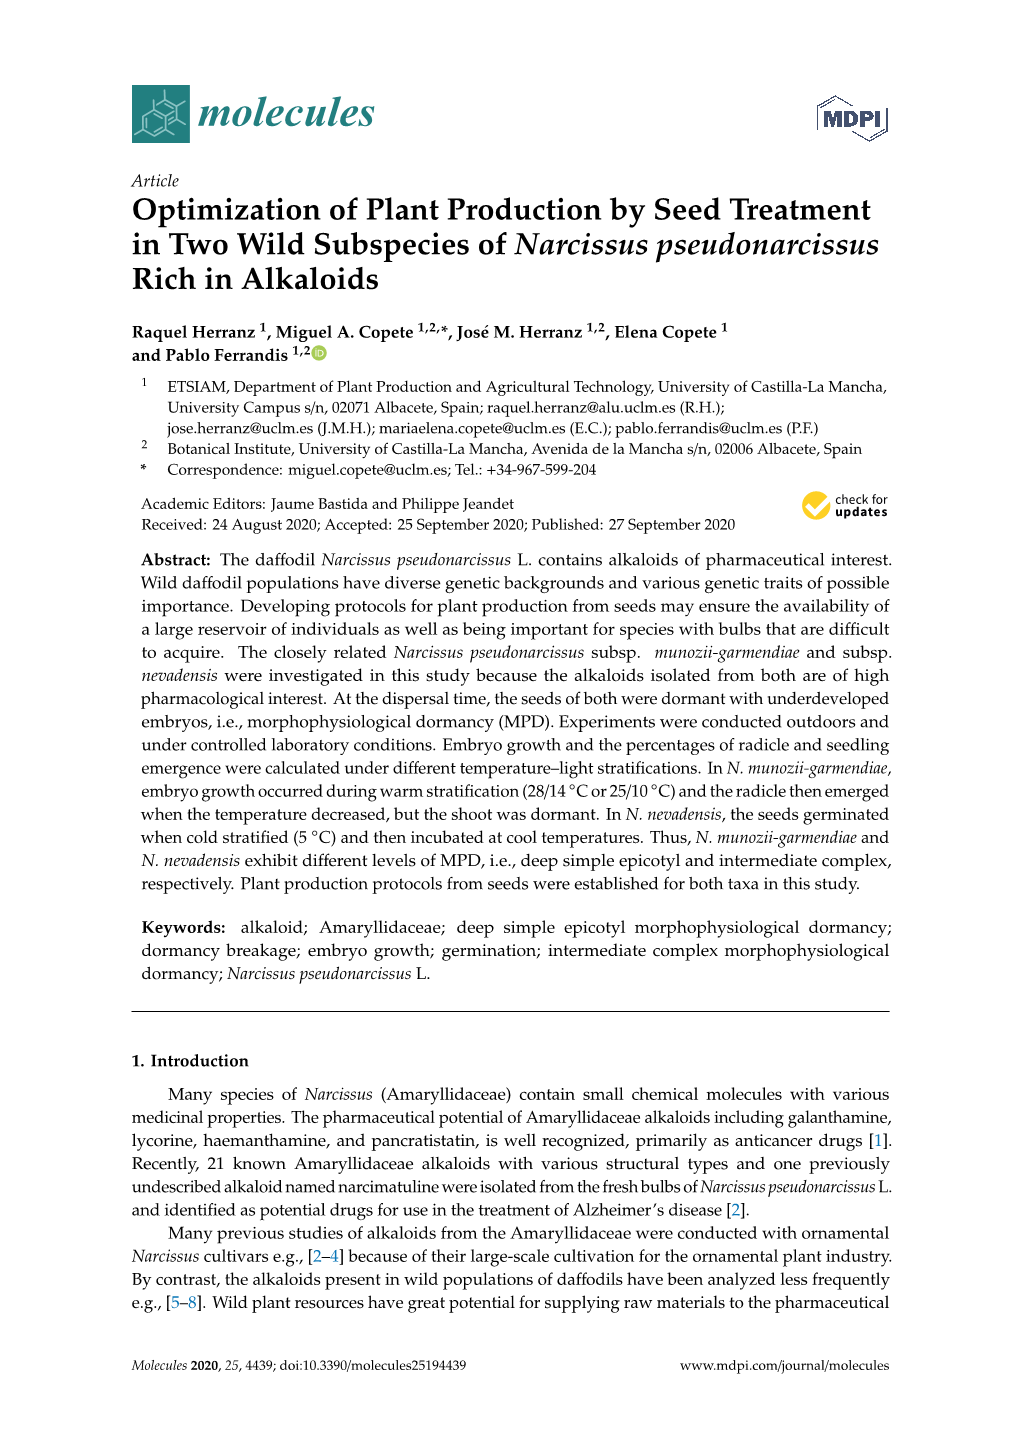 Optimization of Plant Production by Seed Treatment in Two Wild Subspecies of Narcissus Pseudonarcissus Rich in Alkaloids